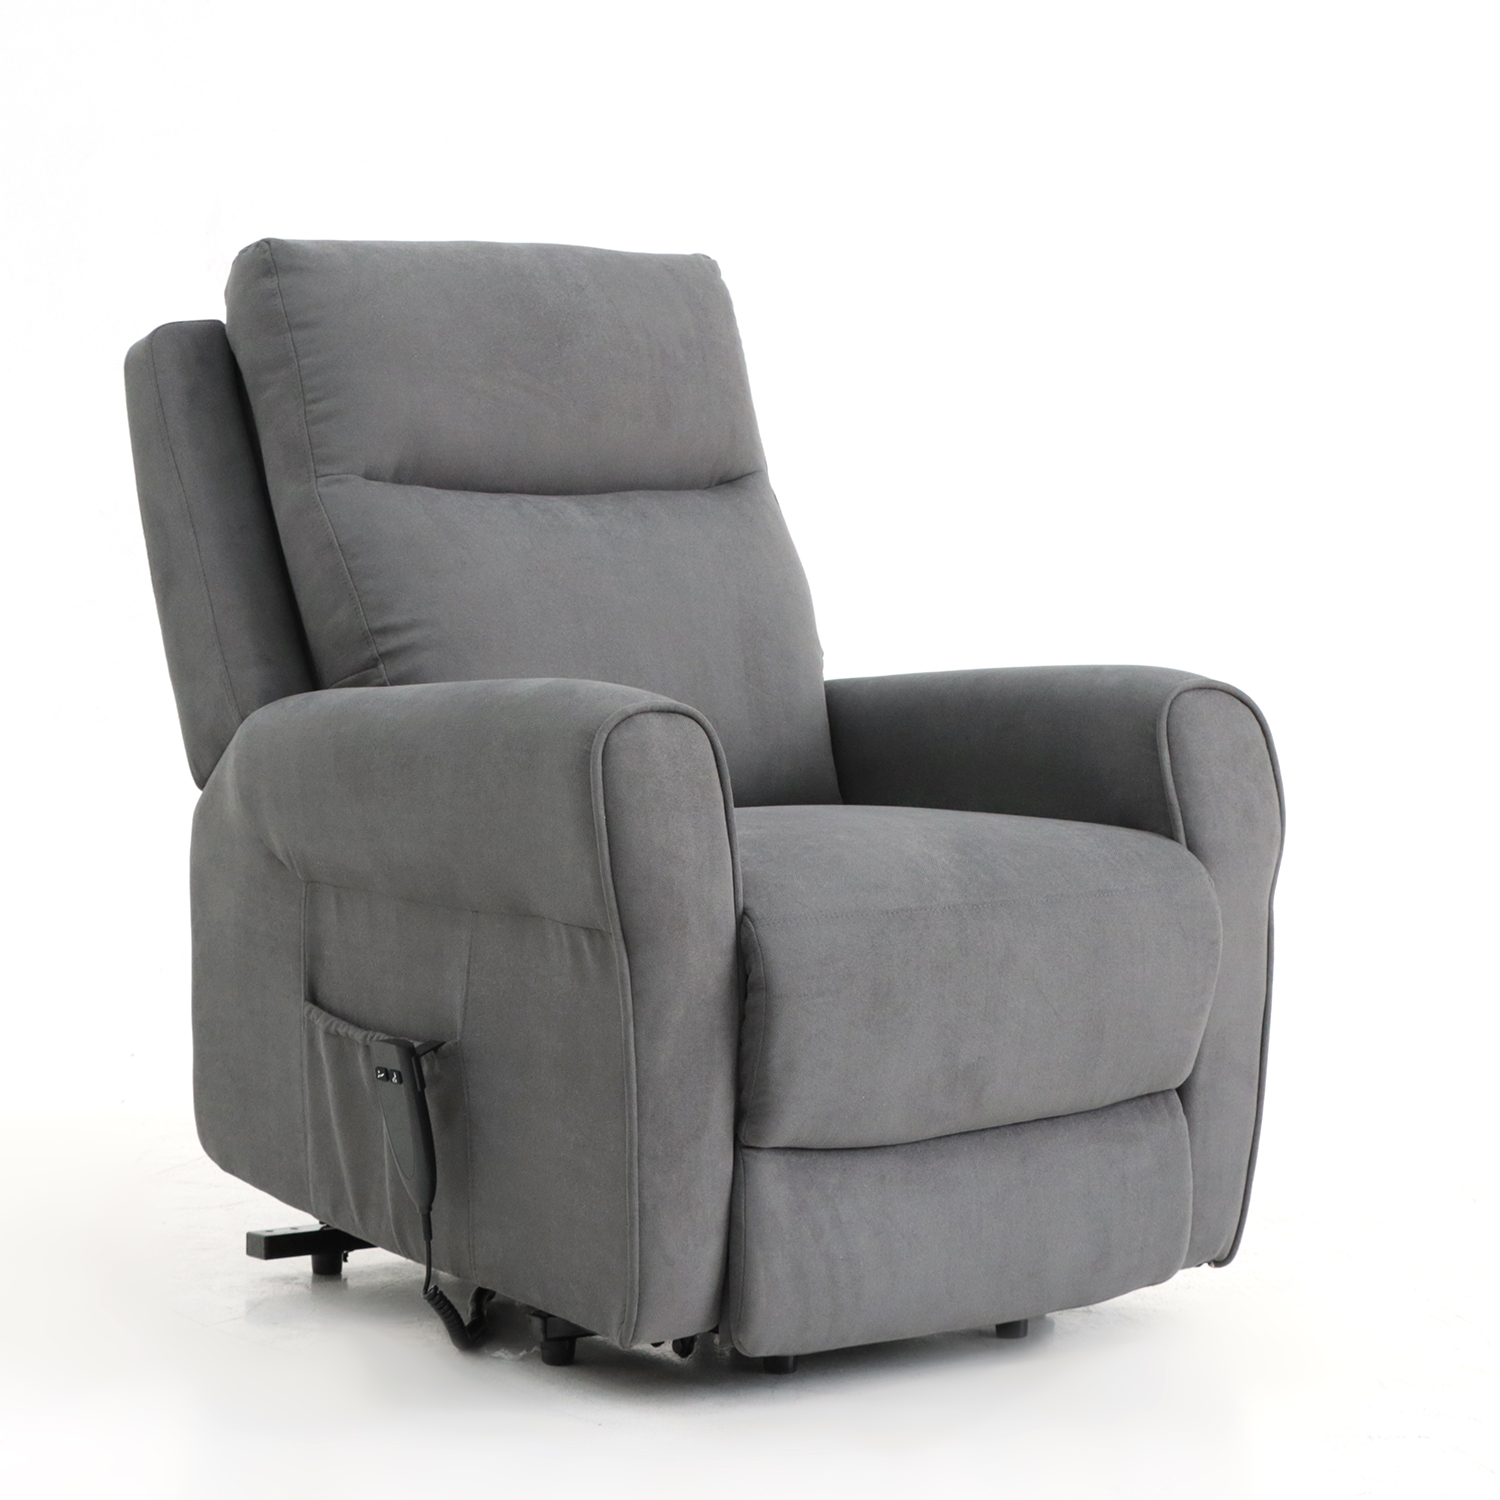 An  intelligent and convenient furniture experience–Power Recliner